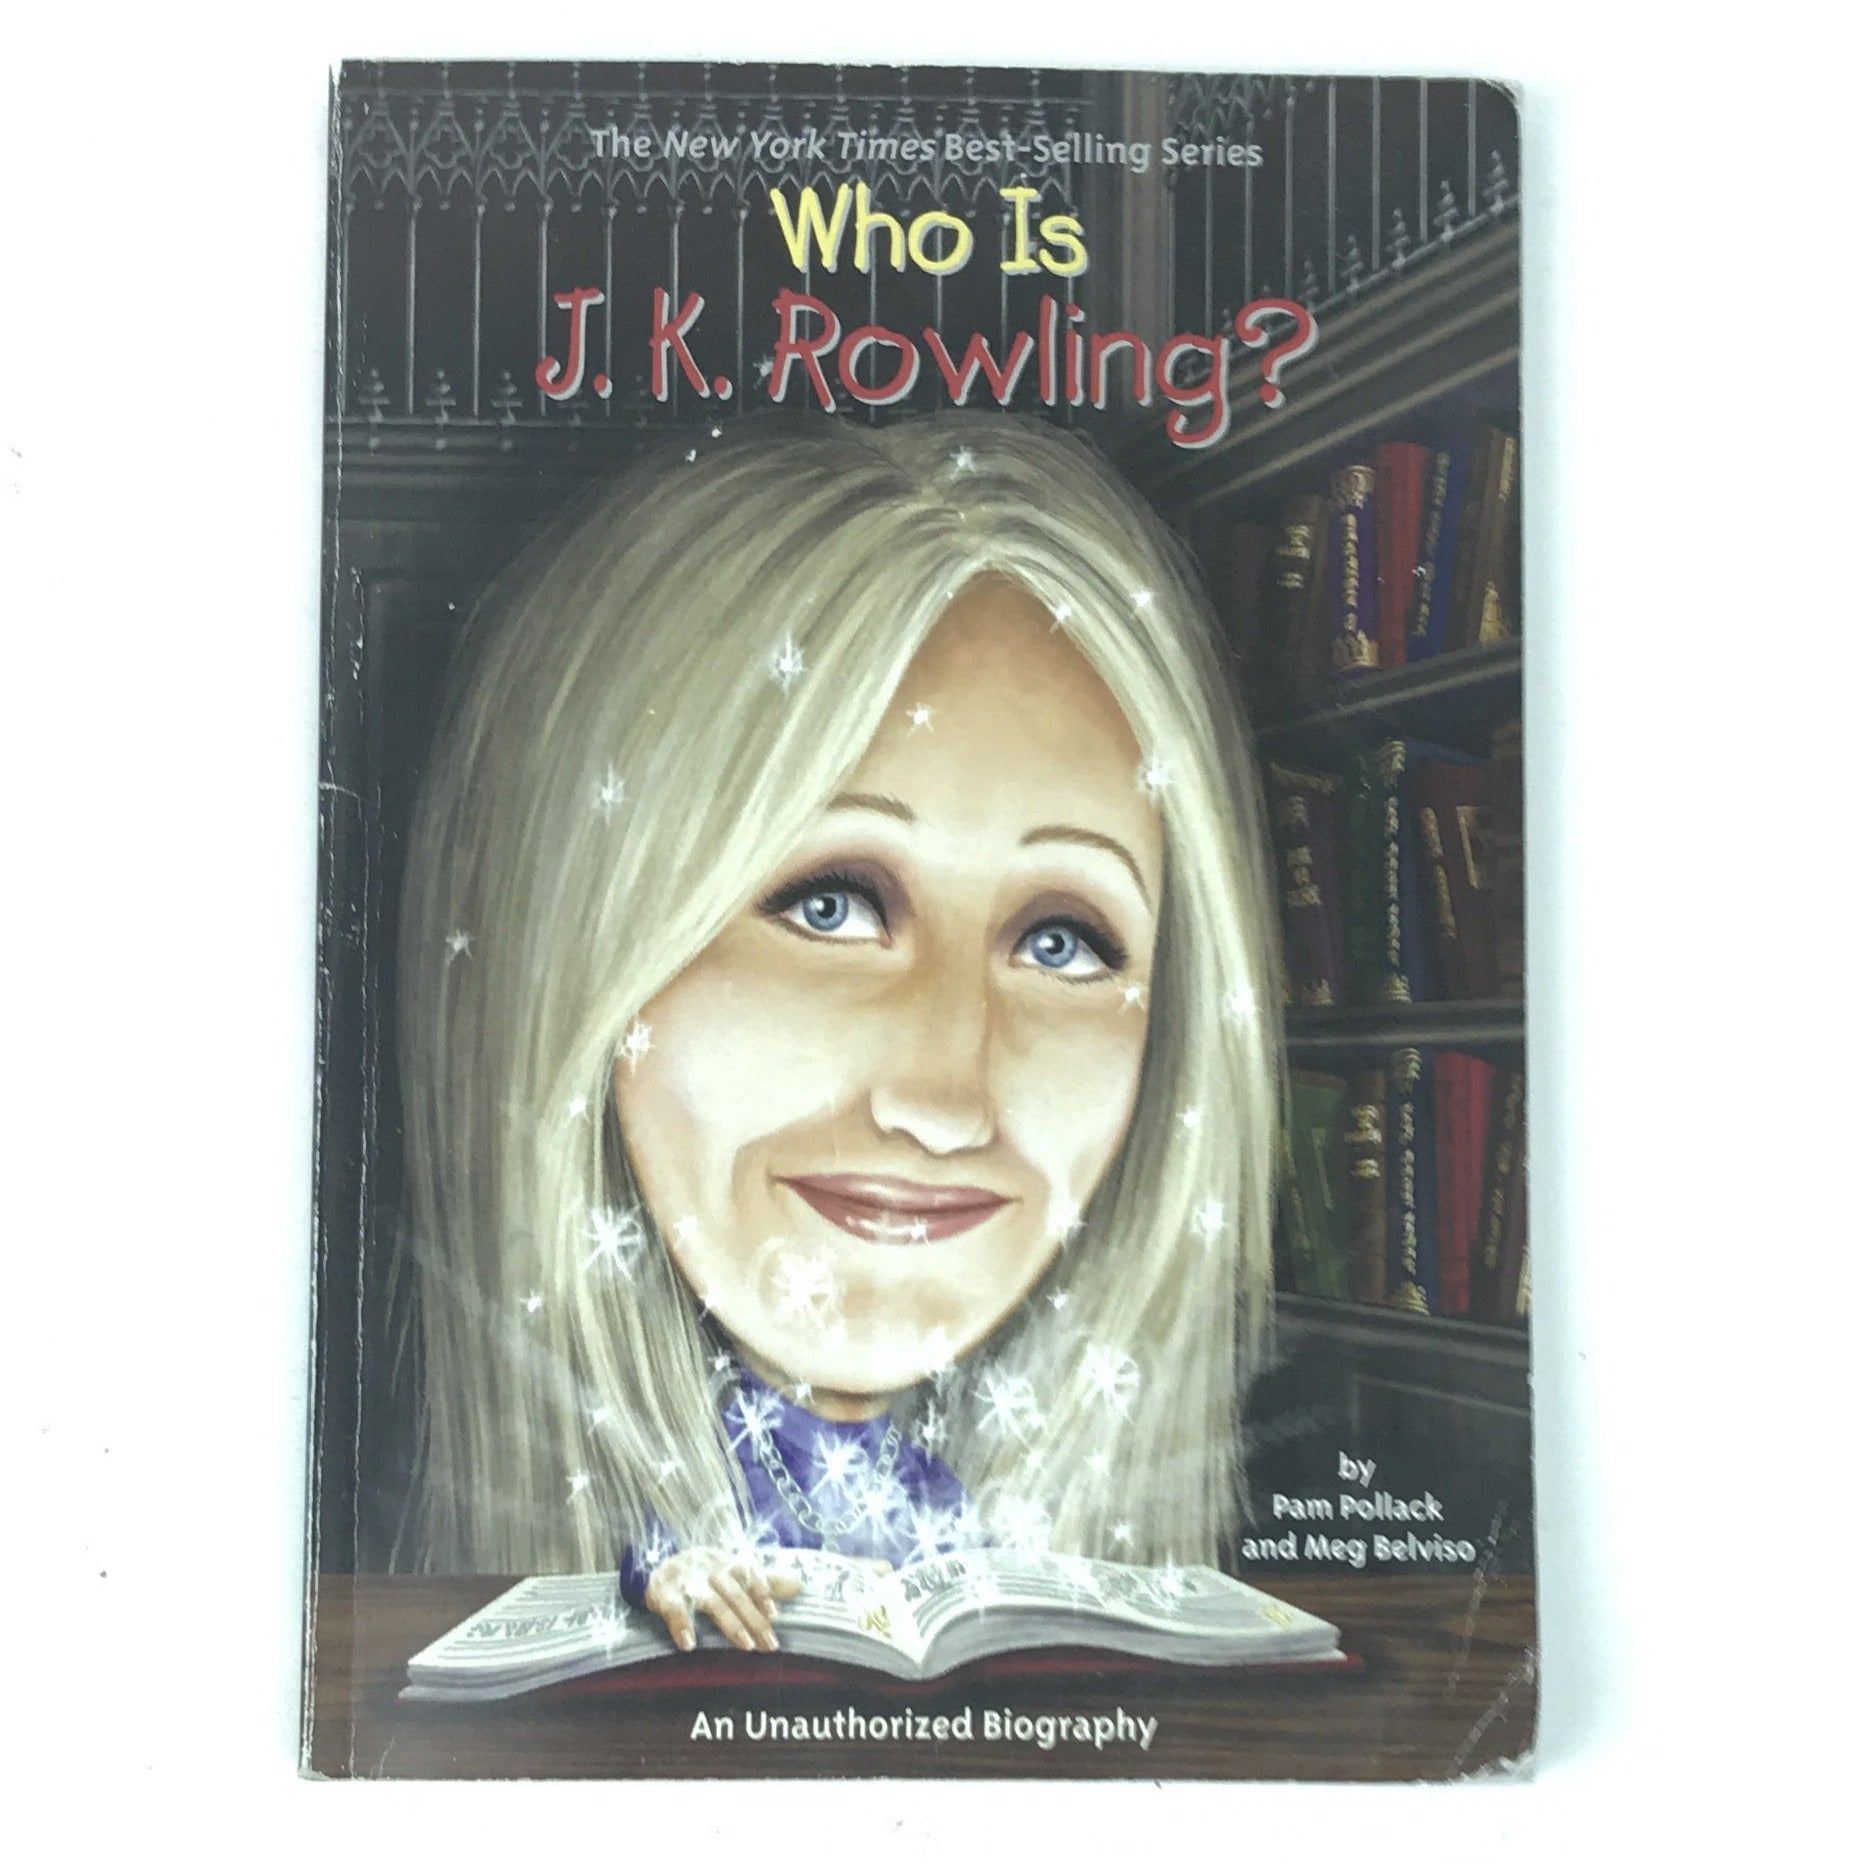 Who is J. K. Rowling? By Pam Pollack and Meg Belviso